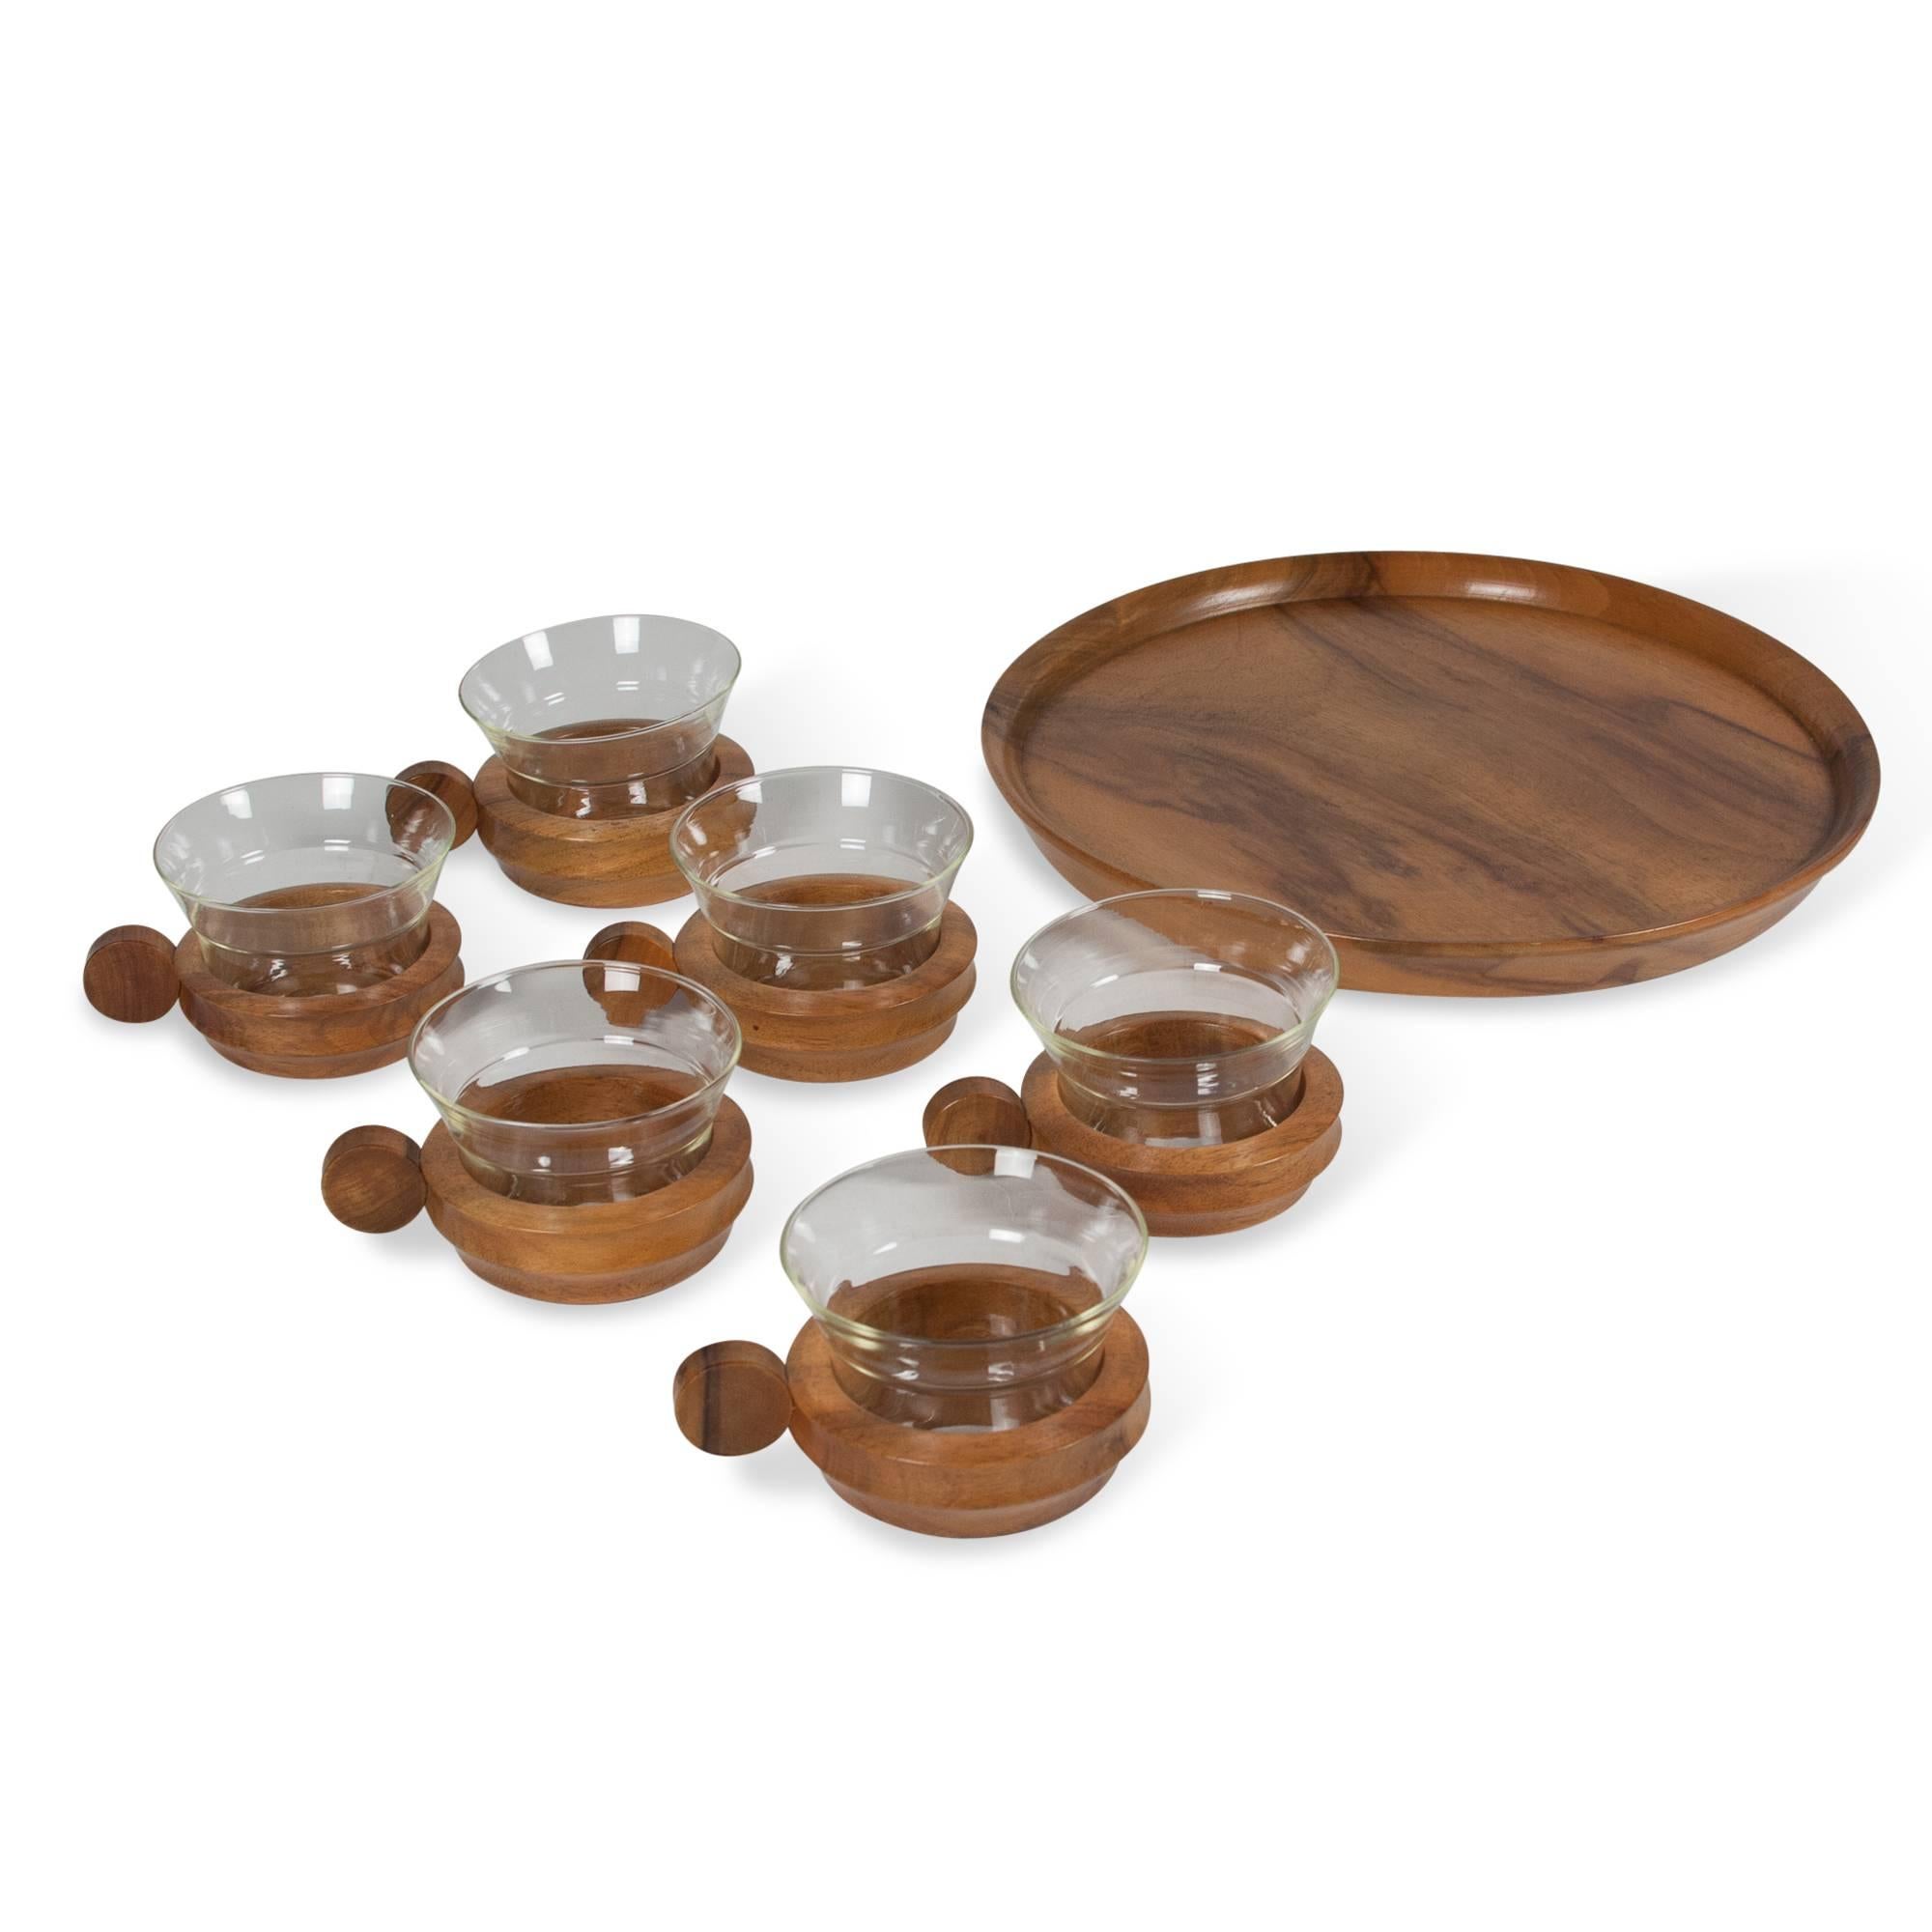 Walnut and glass drinking set comprised of six glasses with handled holders and a round serving tray, Austria, 1960s. Measures: 11” D, 3” H. 